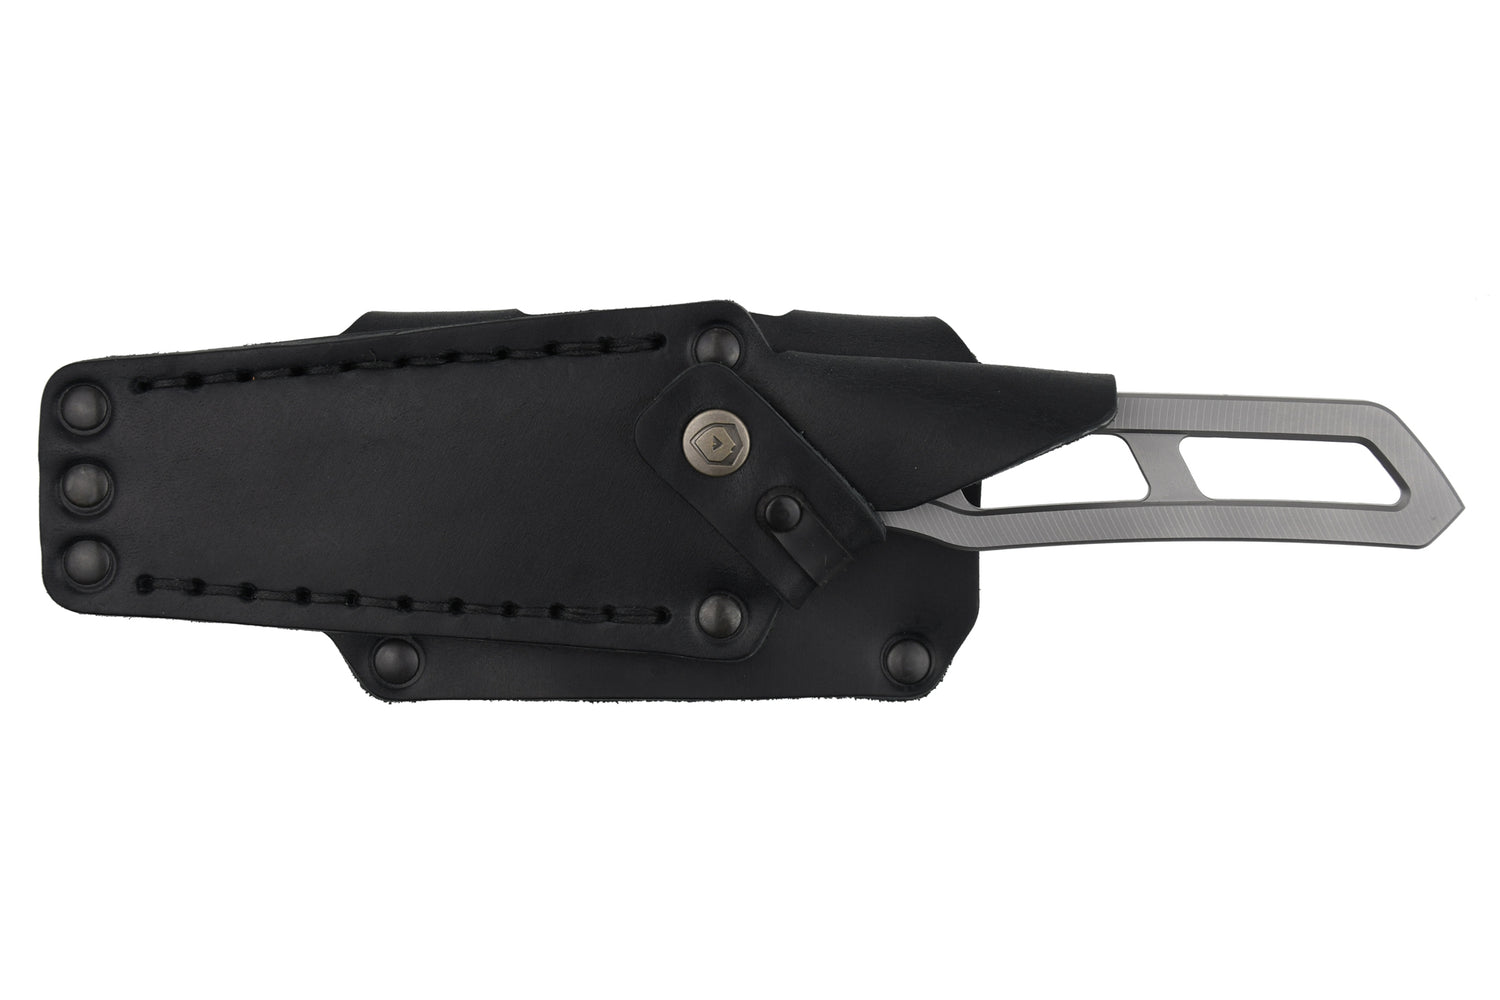 6 Things to Look for In A Modern Pocket Knife